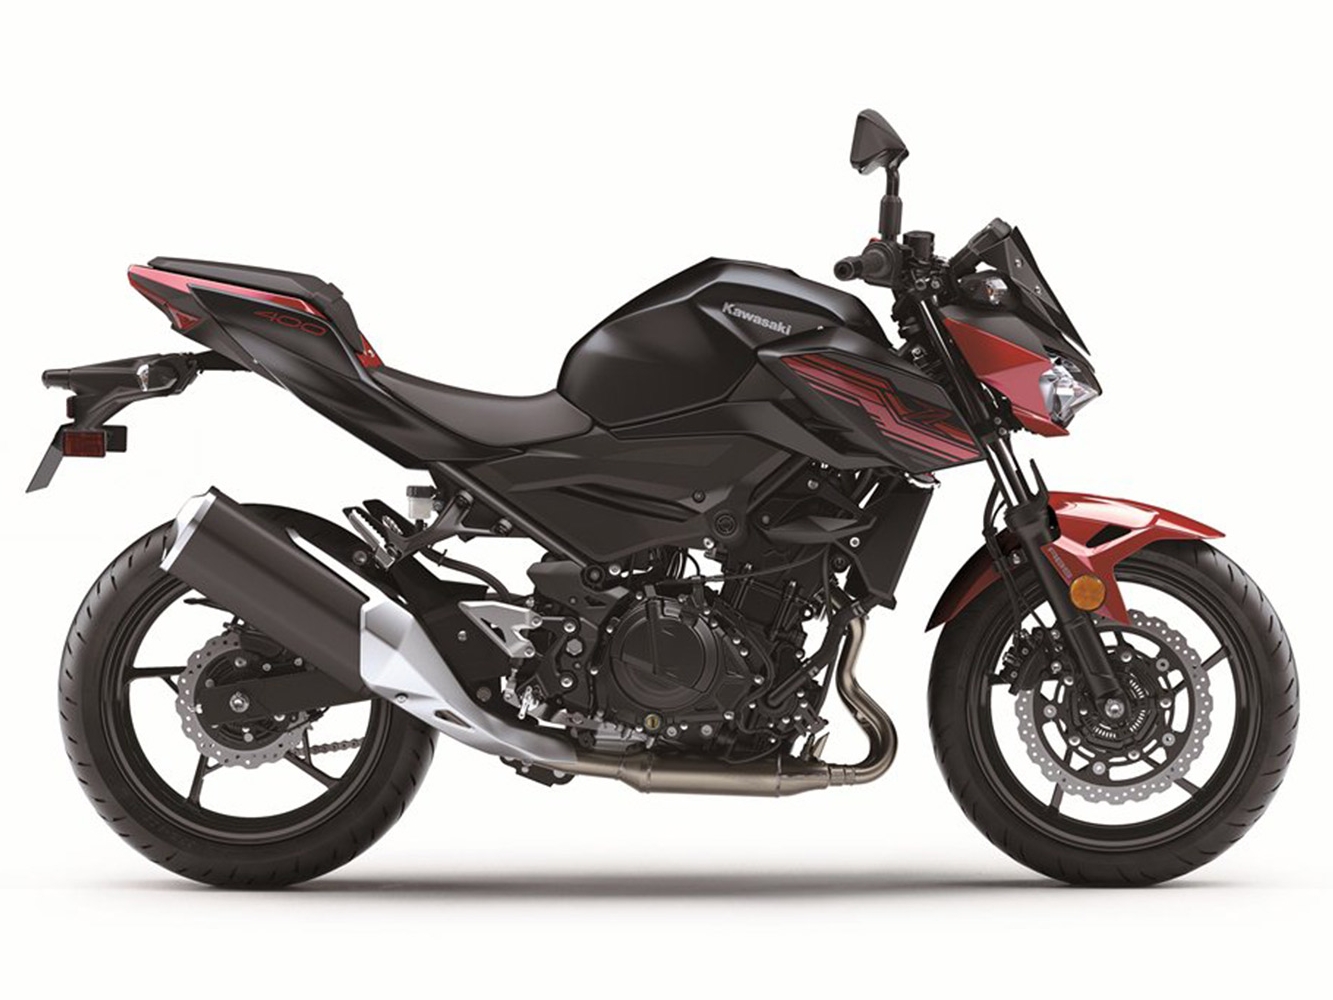 2019 Z400 ABS Buyer's Specs, Price | Cycle World